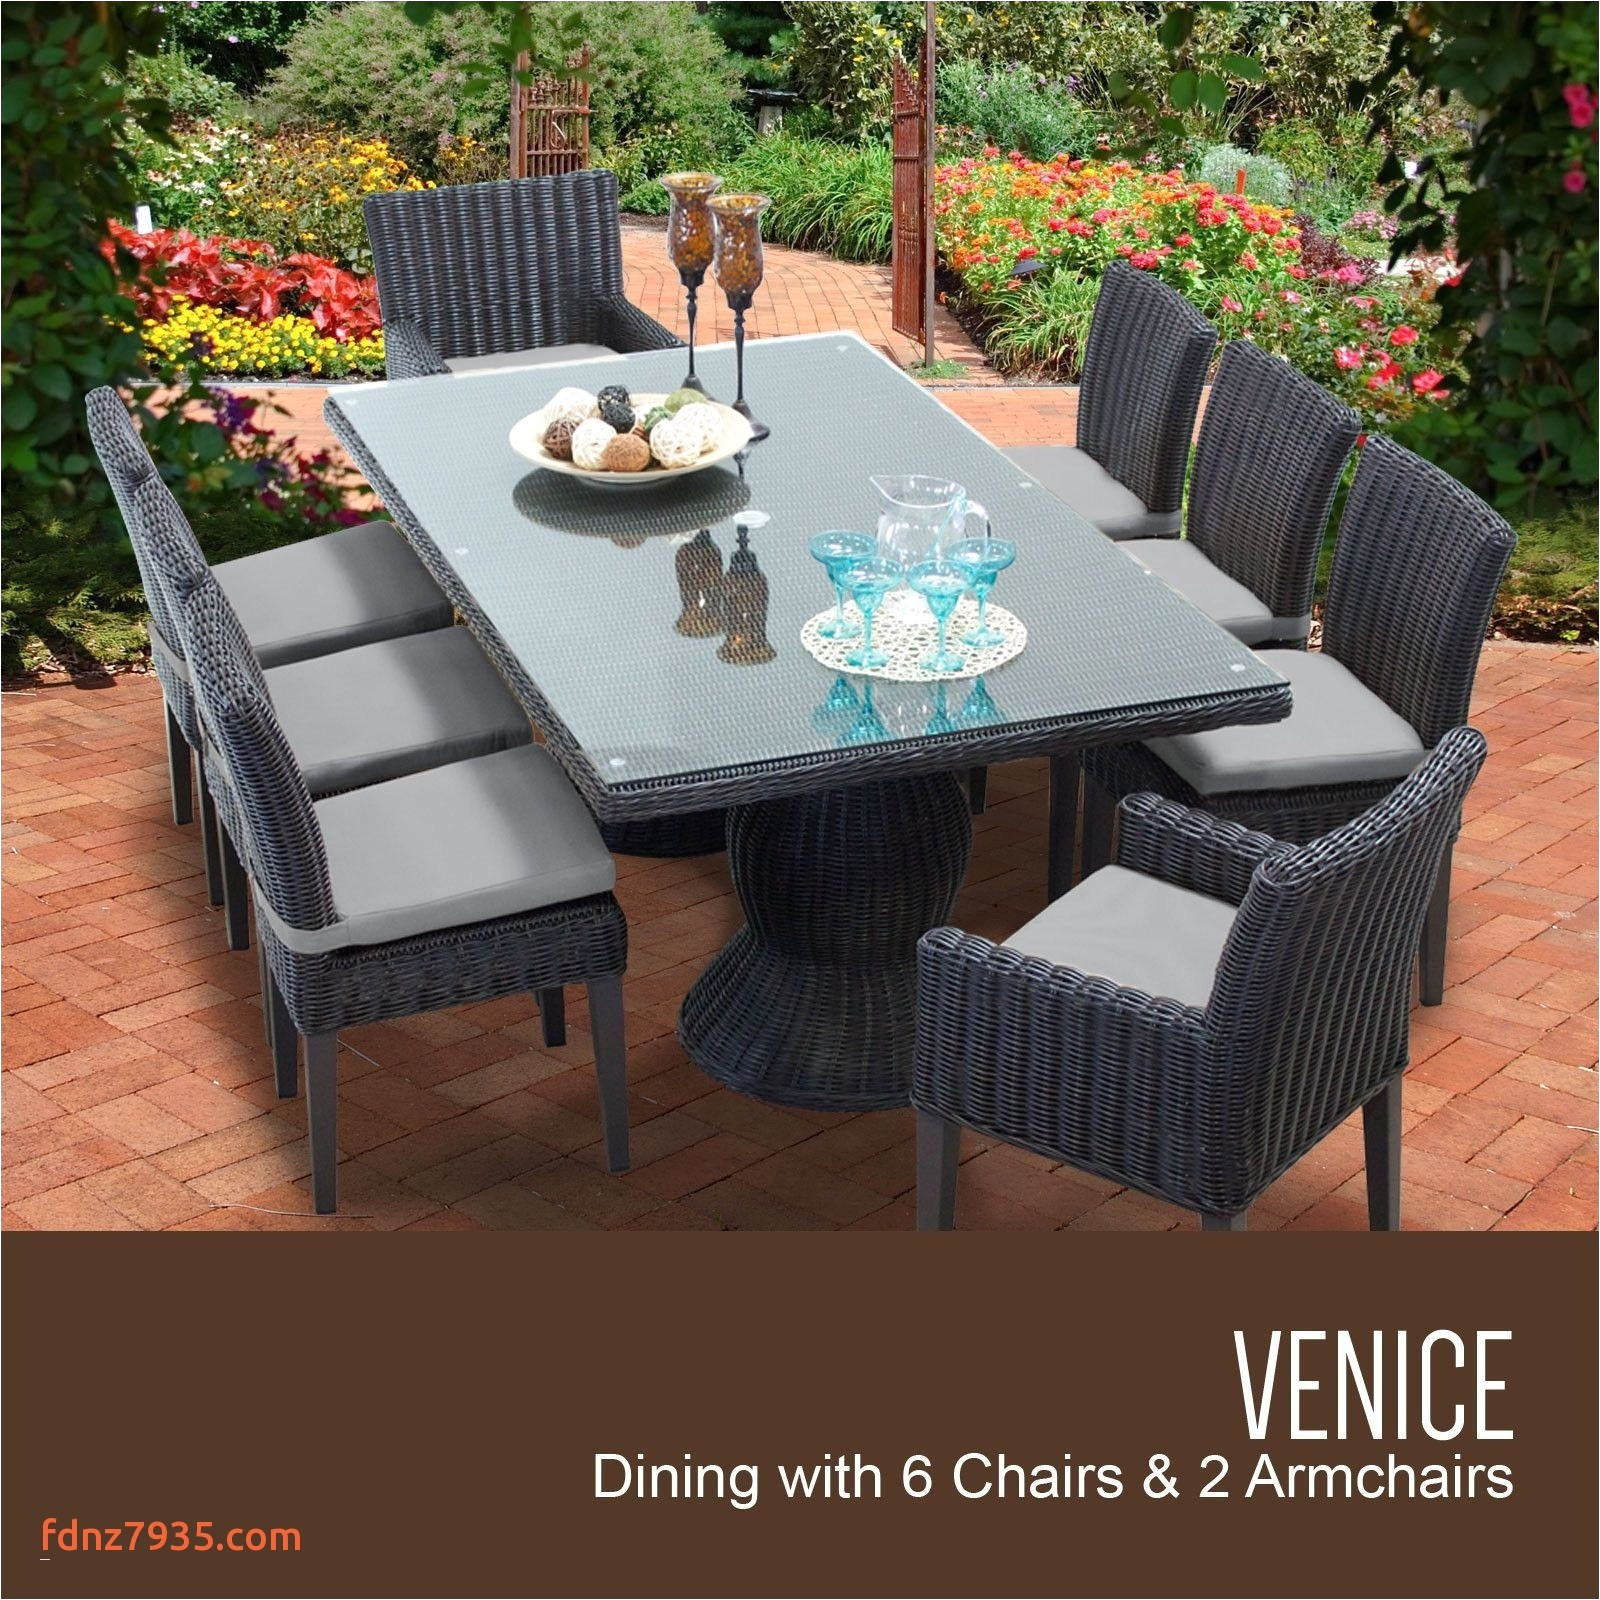 outdoor dining tables fabulous patio dining table lovely wicker outdoor sofa 0d patio chairs sale